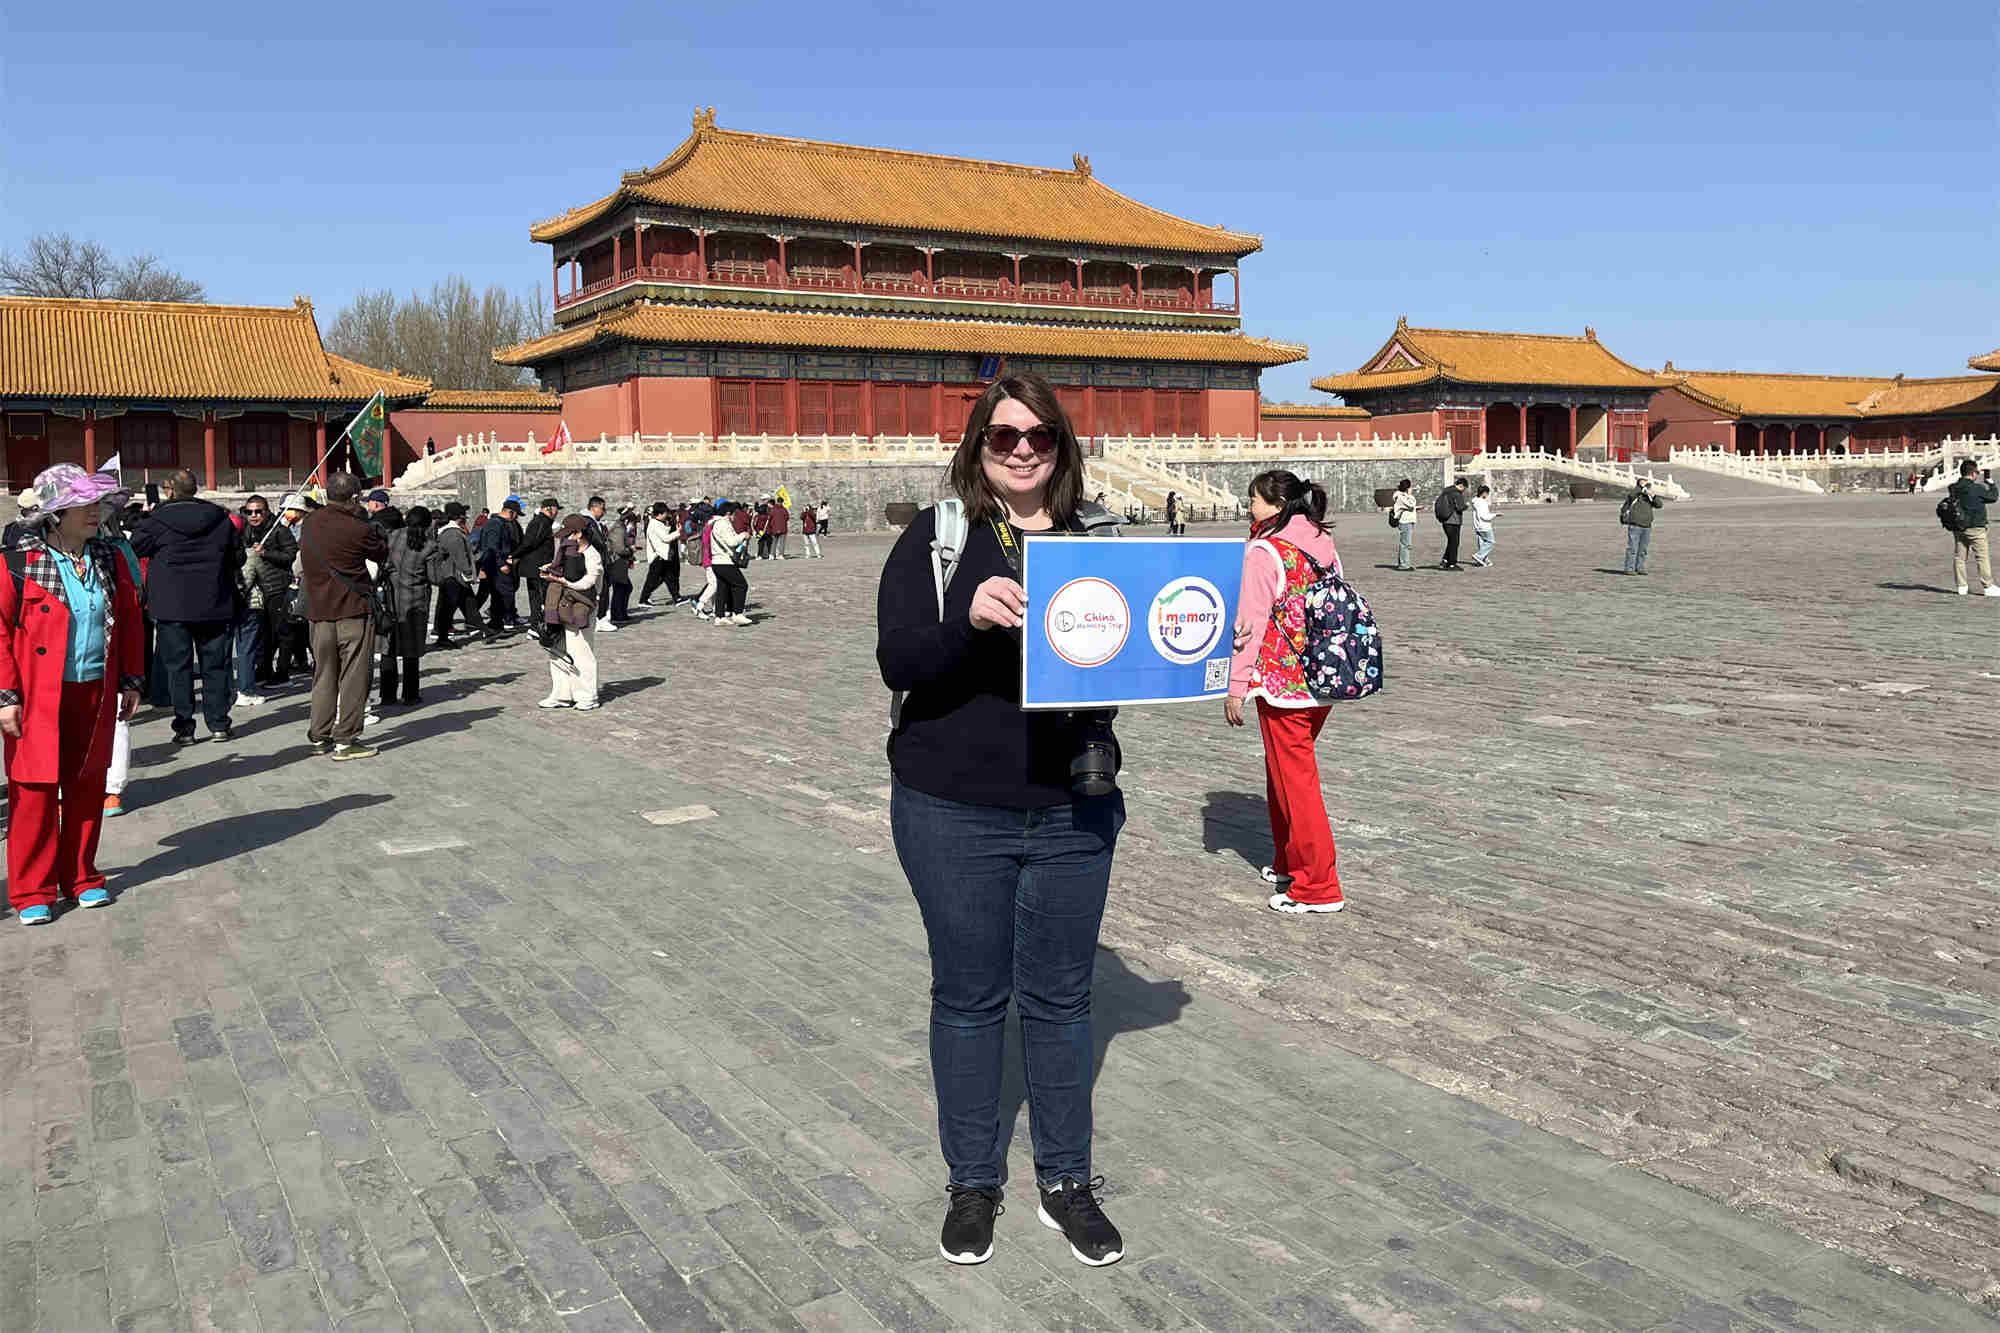 2-Day Beijing Private Tour of Forbidden City, Tiananmen Square, Temple of Heaven, Qianmen Street and Great Wall